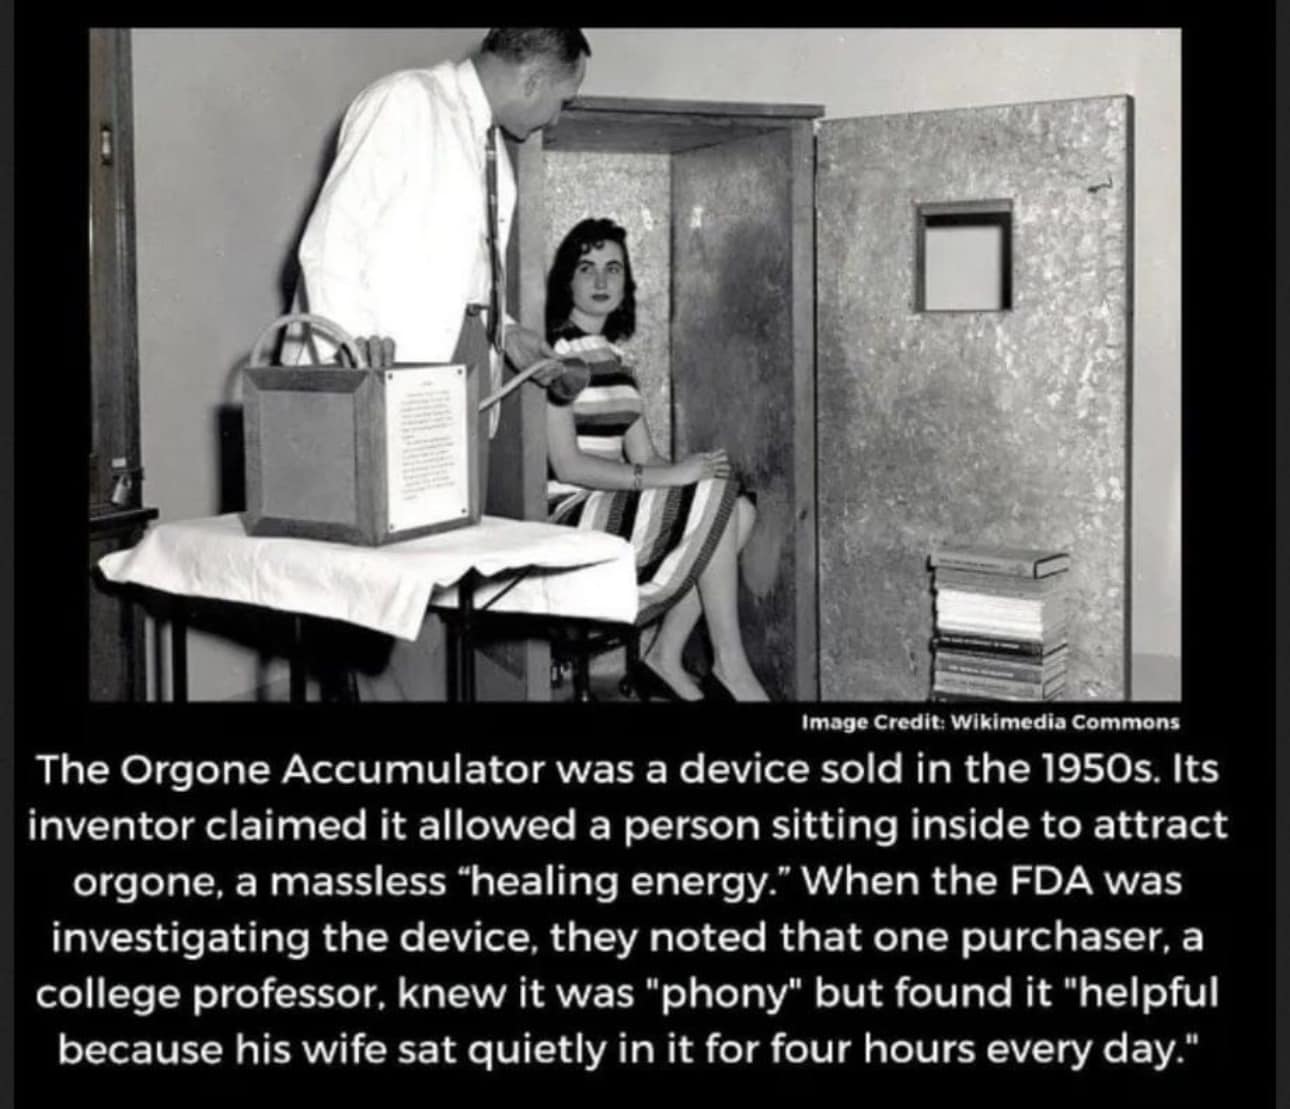 the orgone accumulator was a device sold in the 1950s, its inventor claimed it allowed a person sitting inside to attract orgone, a massless healing energy, helpful because his wife say quietly in it for fours hours every day